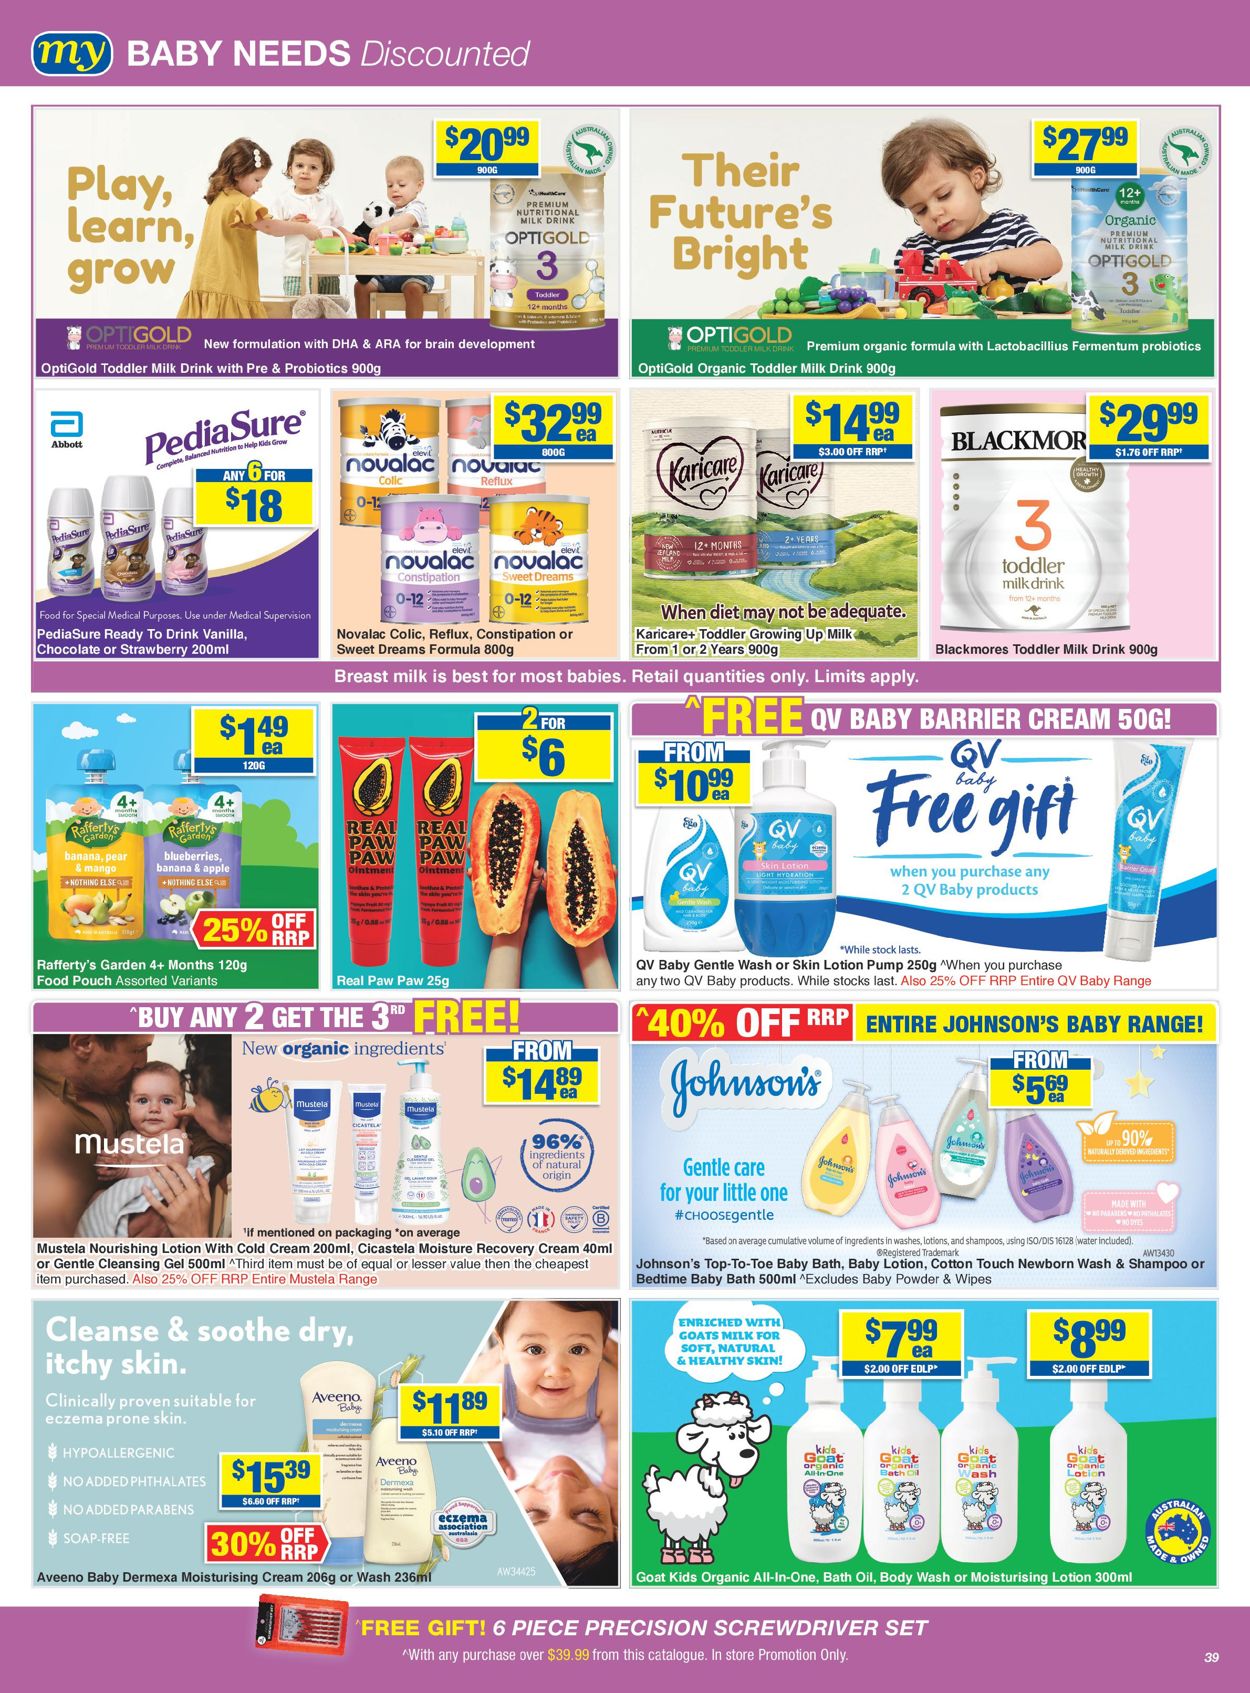 My Chemist Catalogue from 19/08/2021